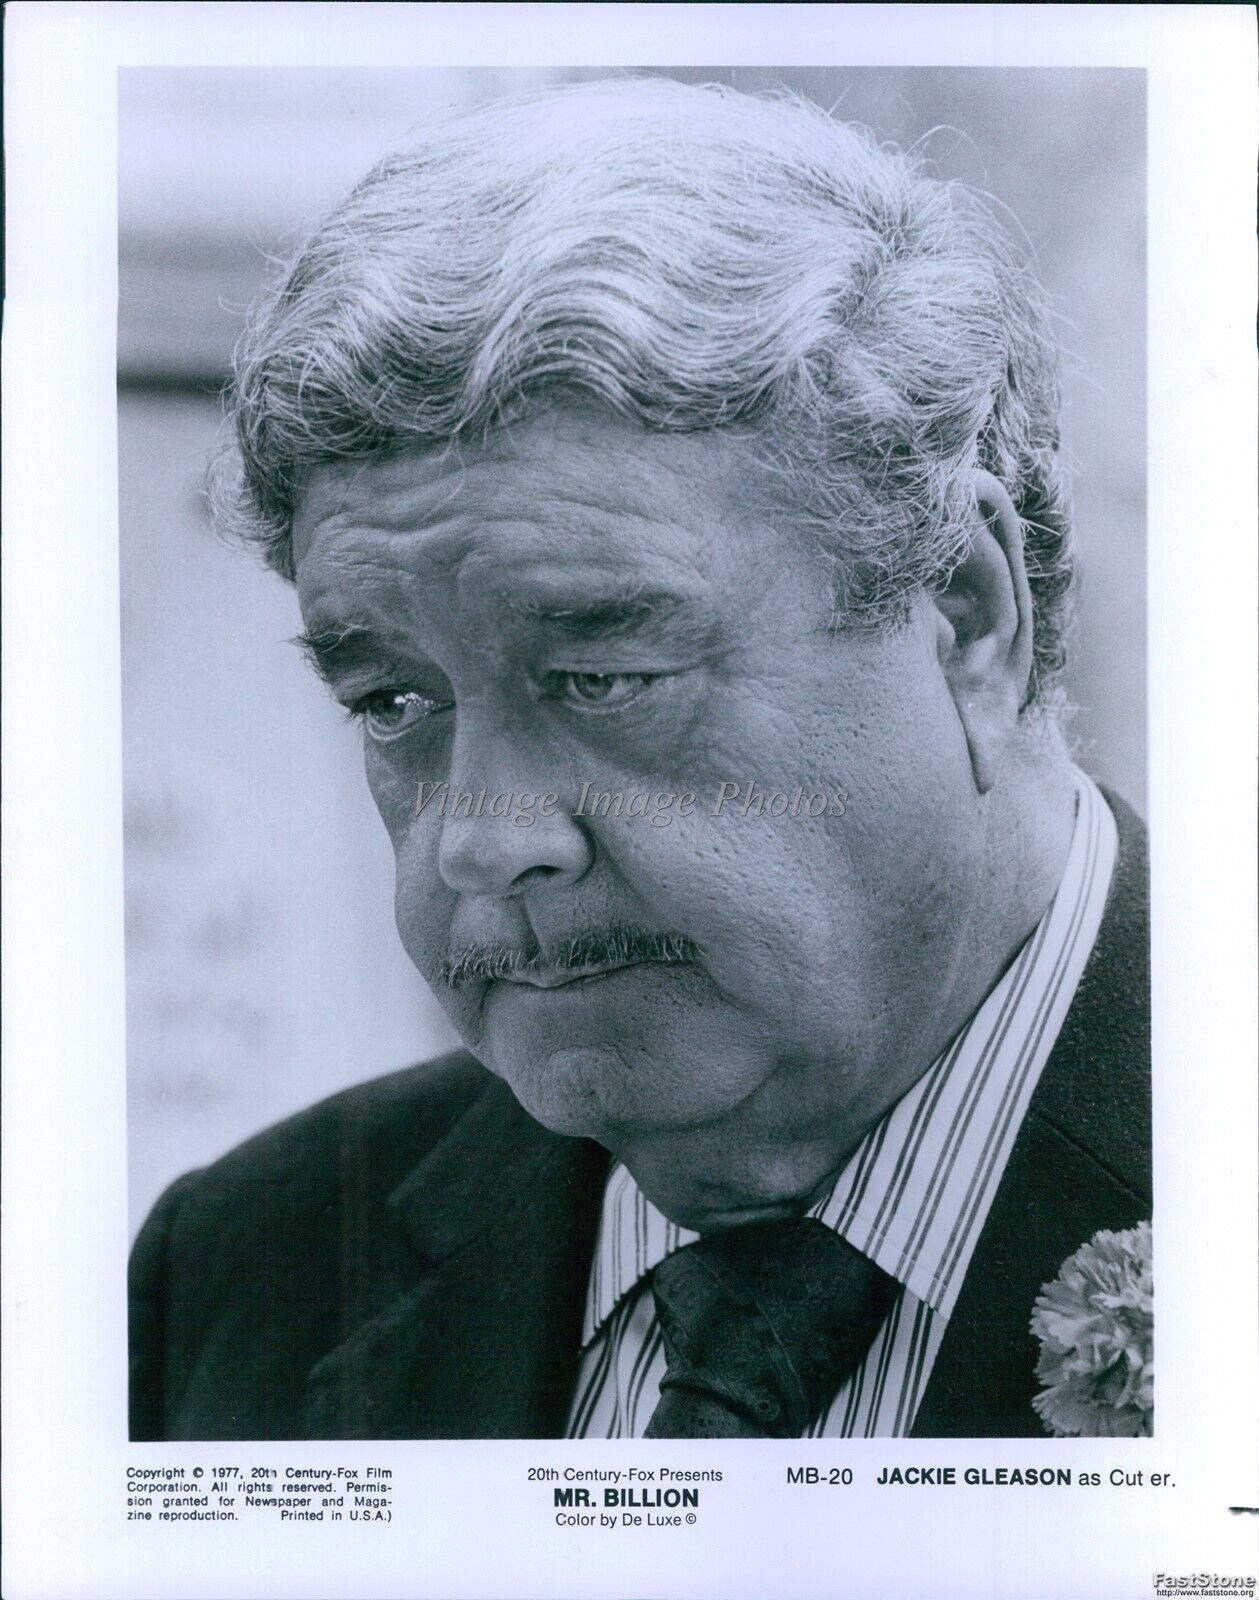 1977 Jackie Gleason The Great One As Cutler In Mr. Billion Movies Photo 8X10